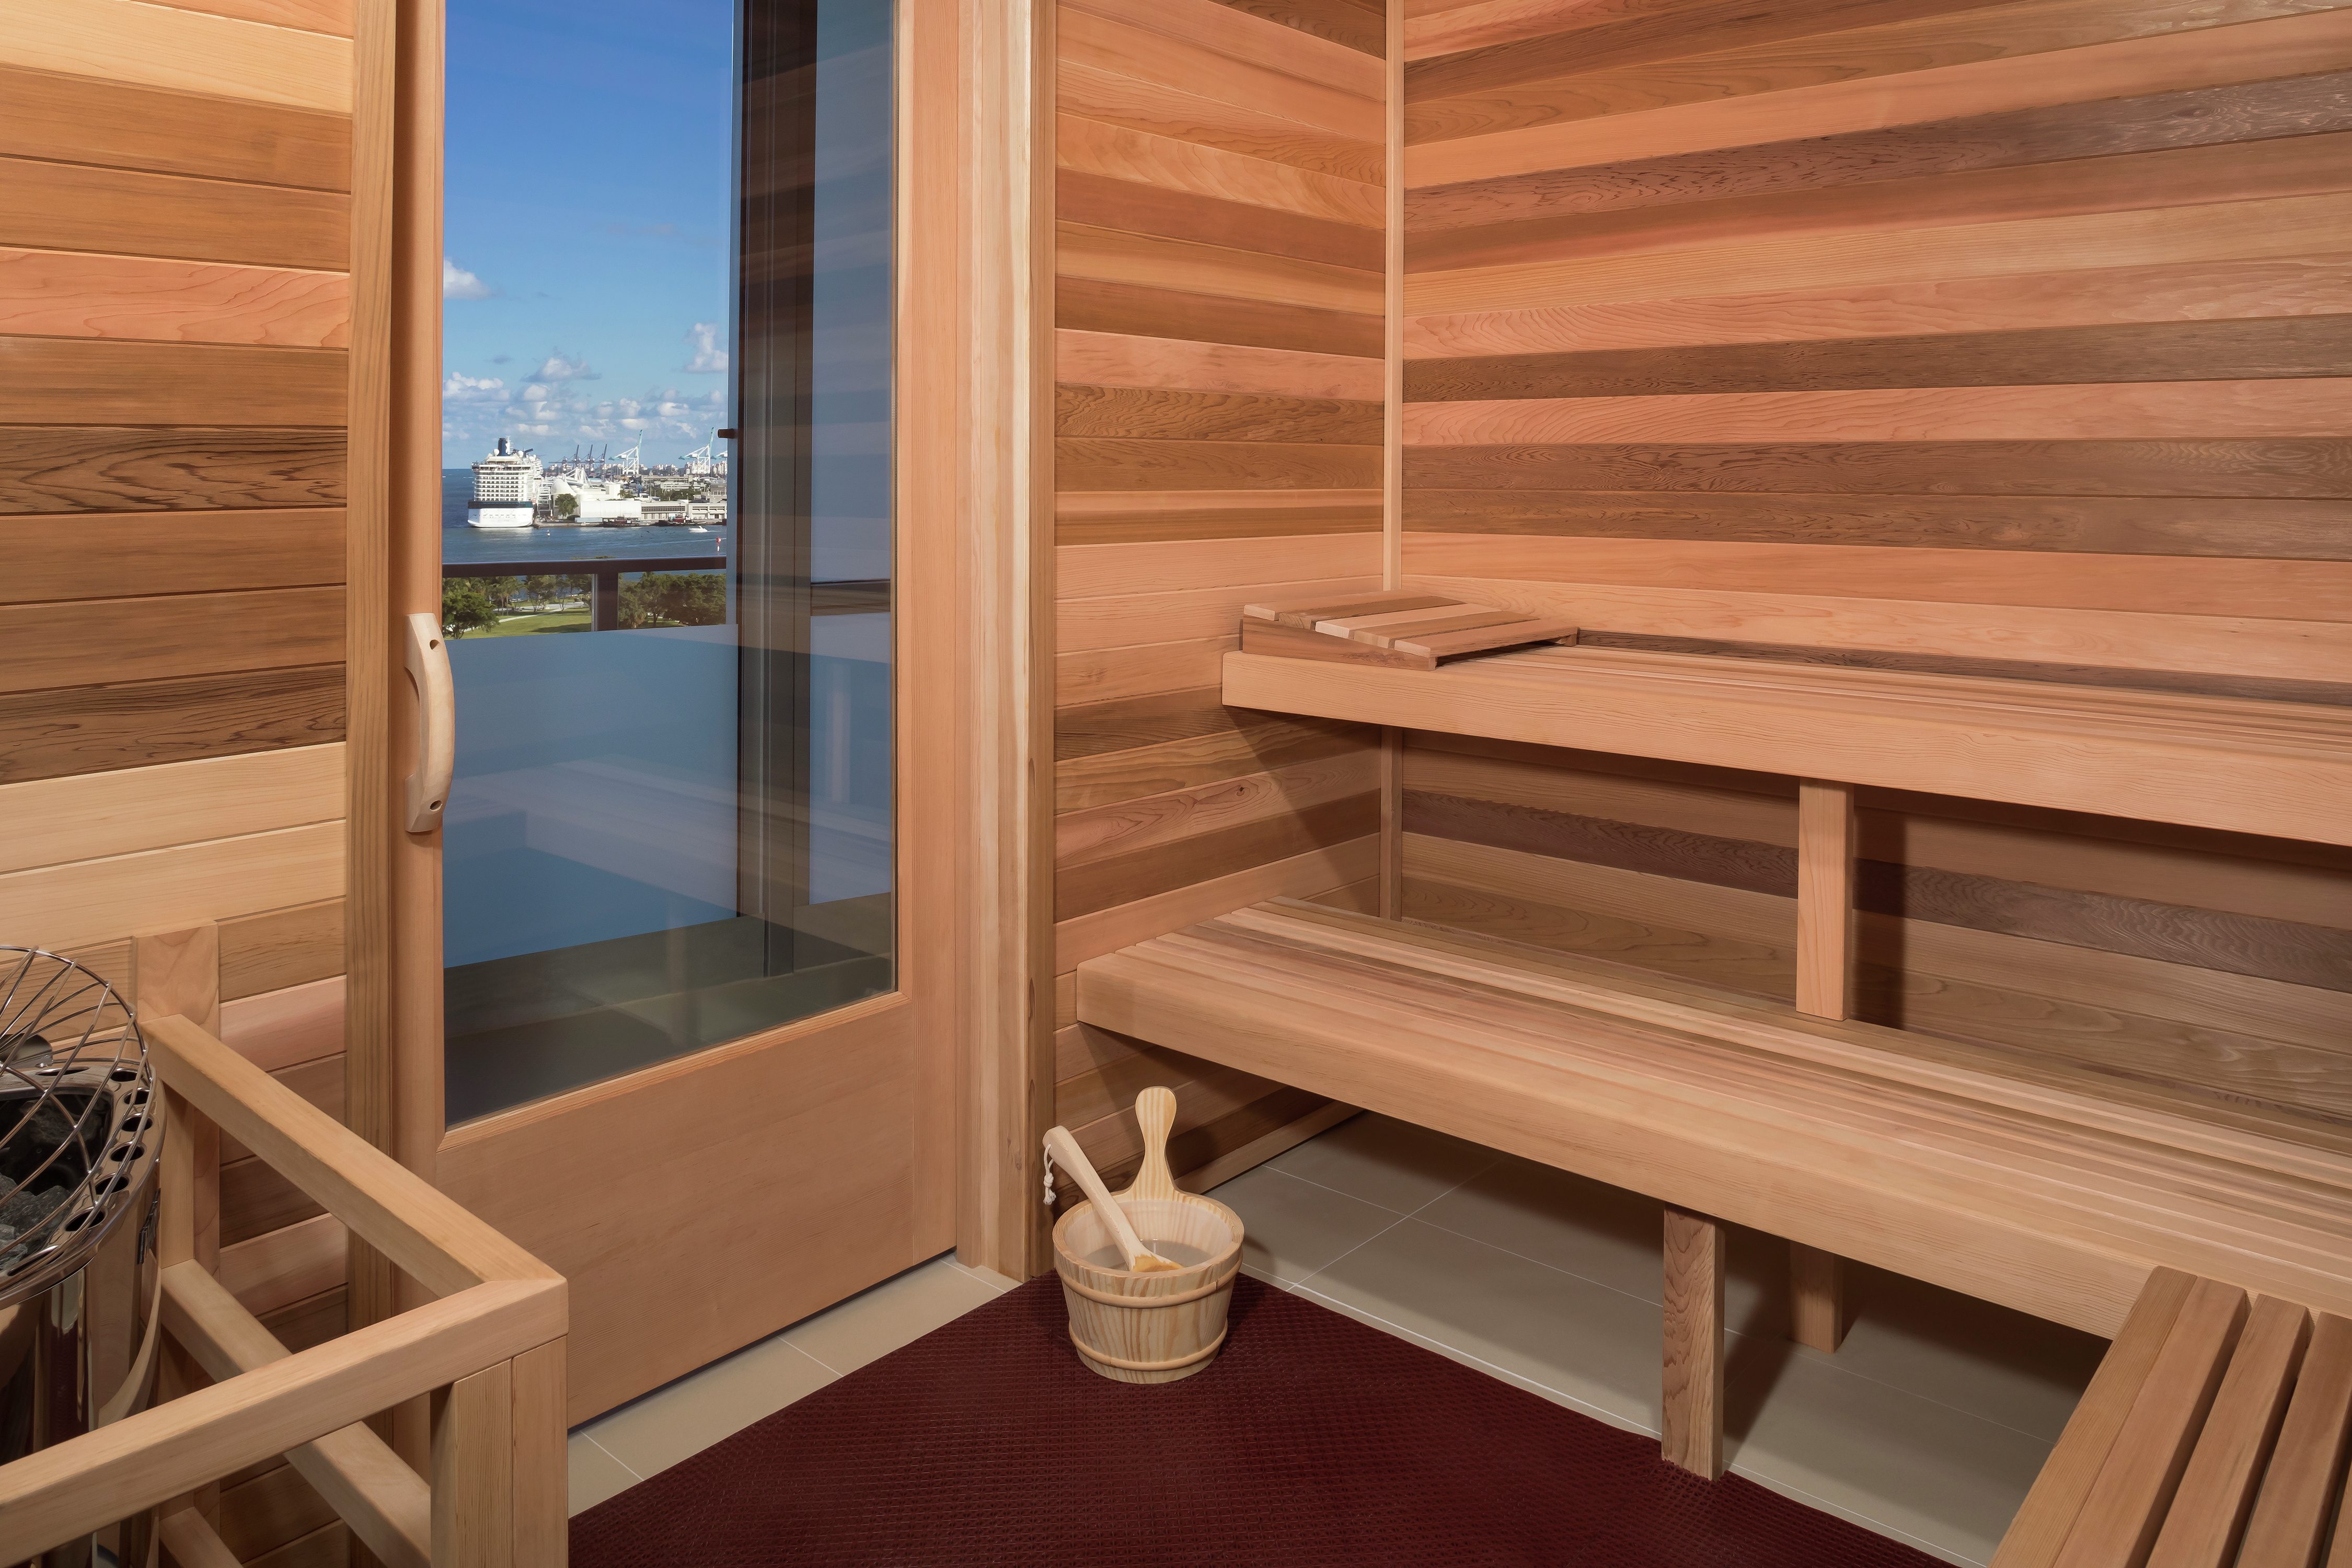 Sauna Room with Outside View